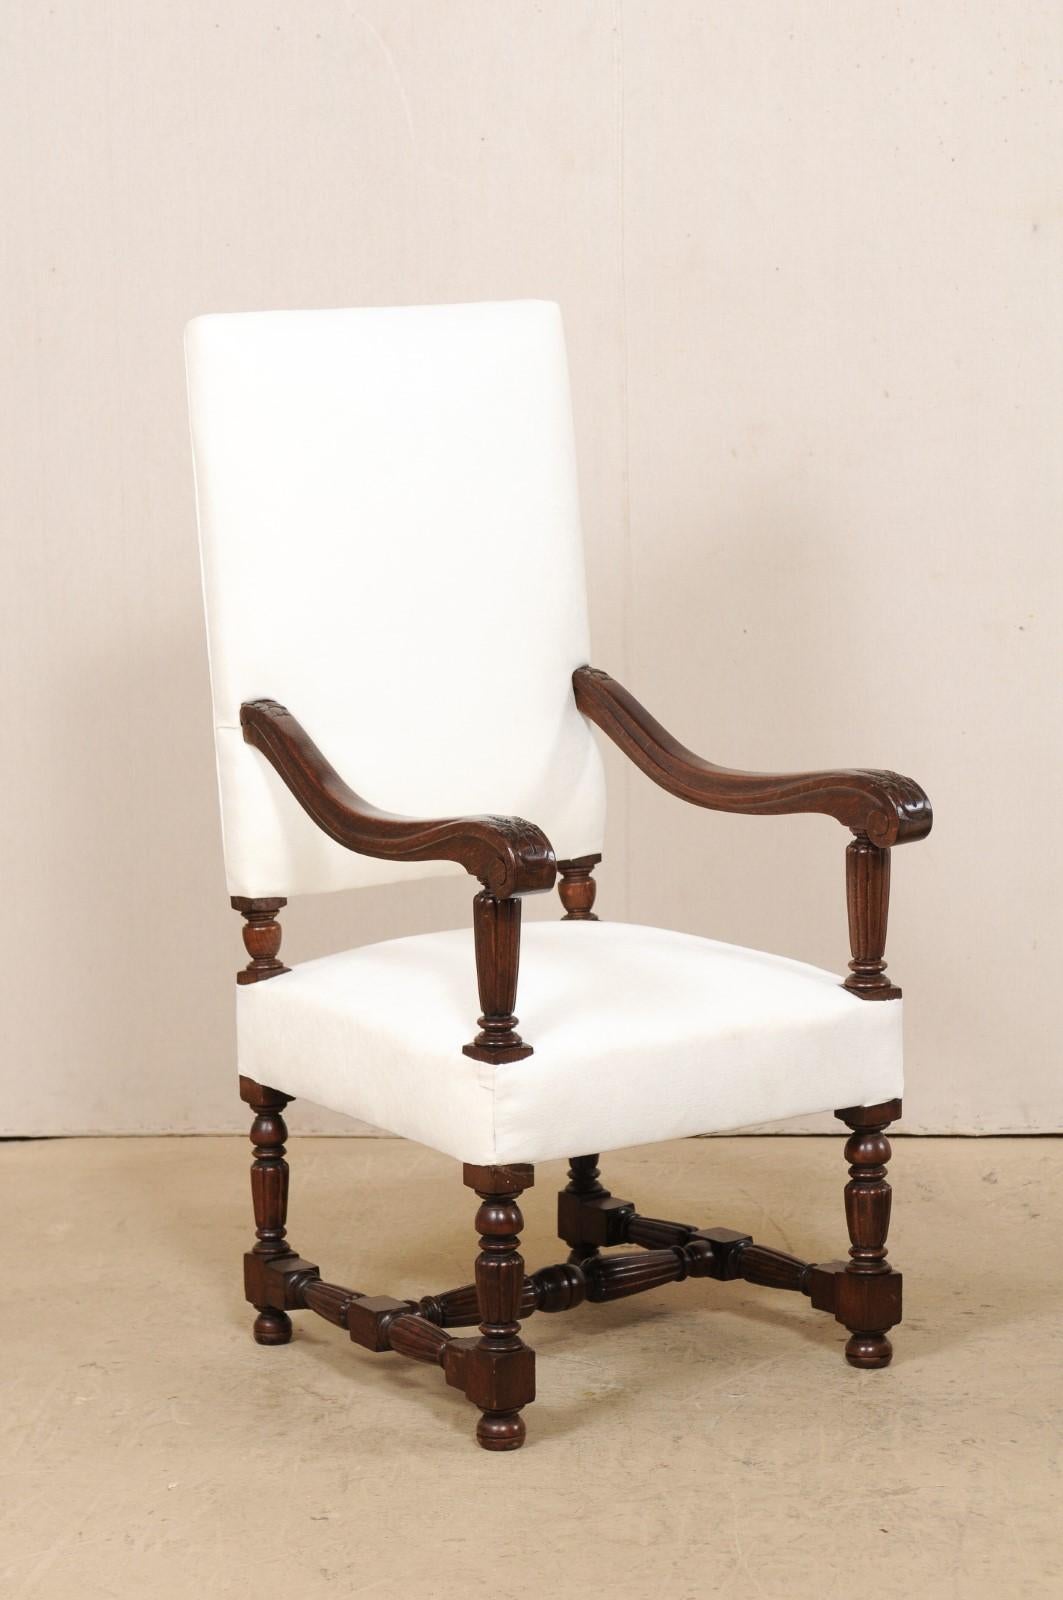 19th Century Pair of Italian Carved-Wood Armchairs with Newly Upholstered Seat and Back